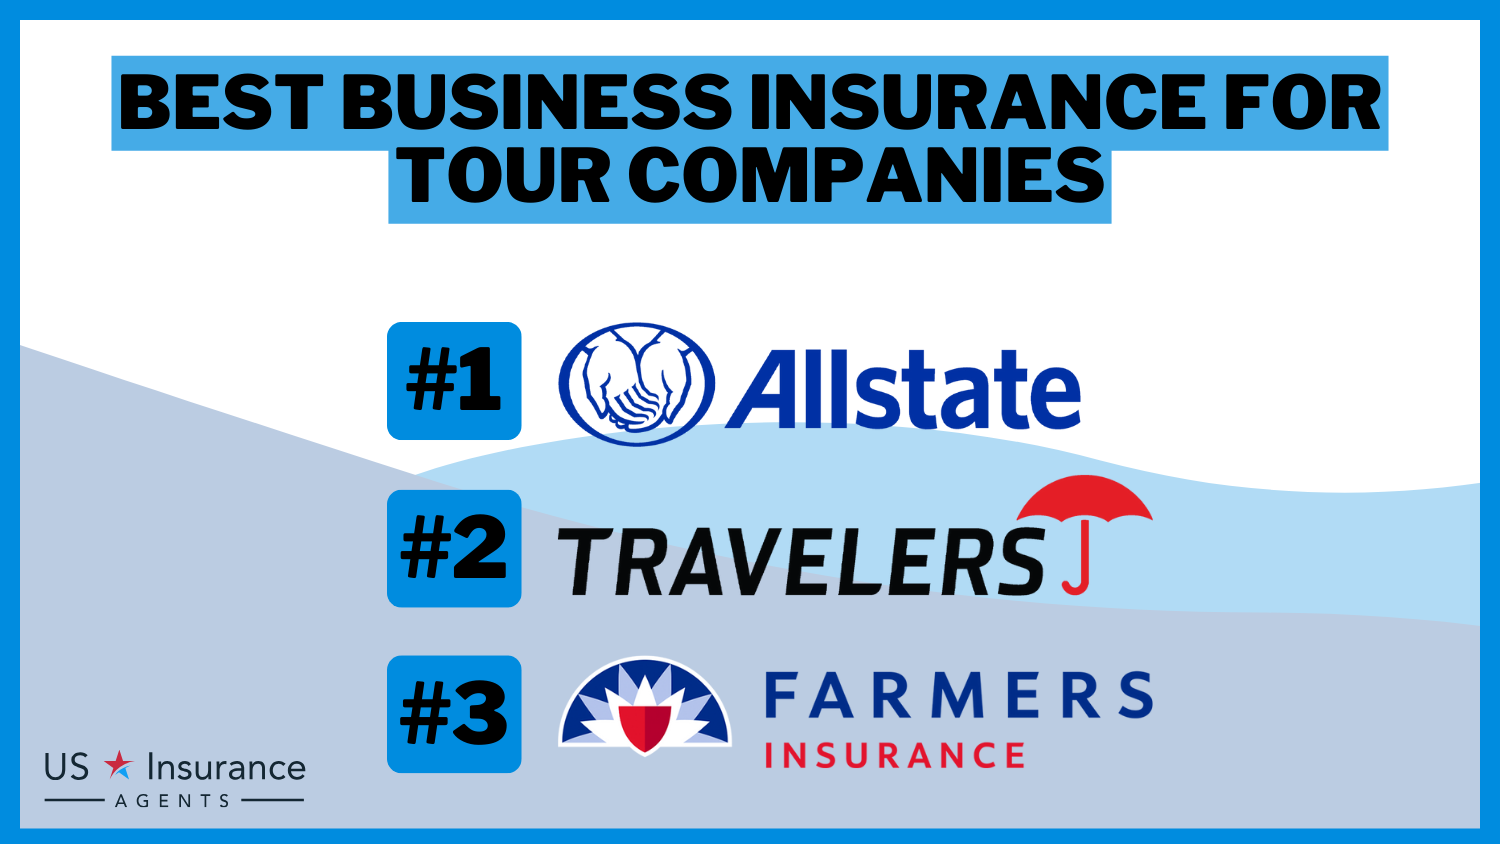 Allstate, Travelers, and Farmers: Best Business Insurance for Tour Companies